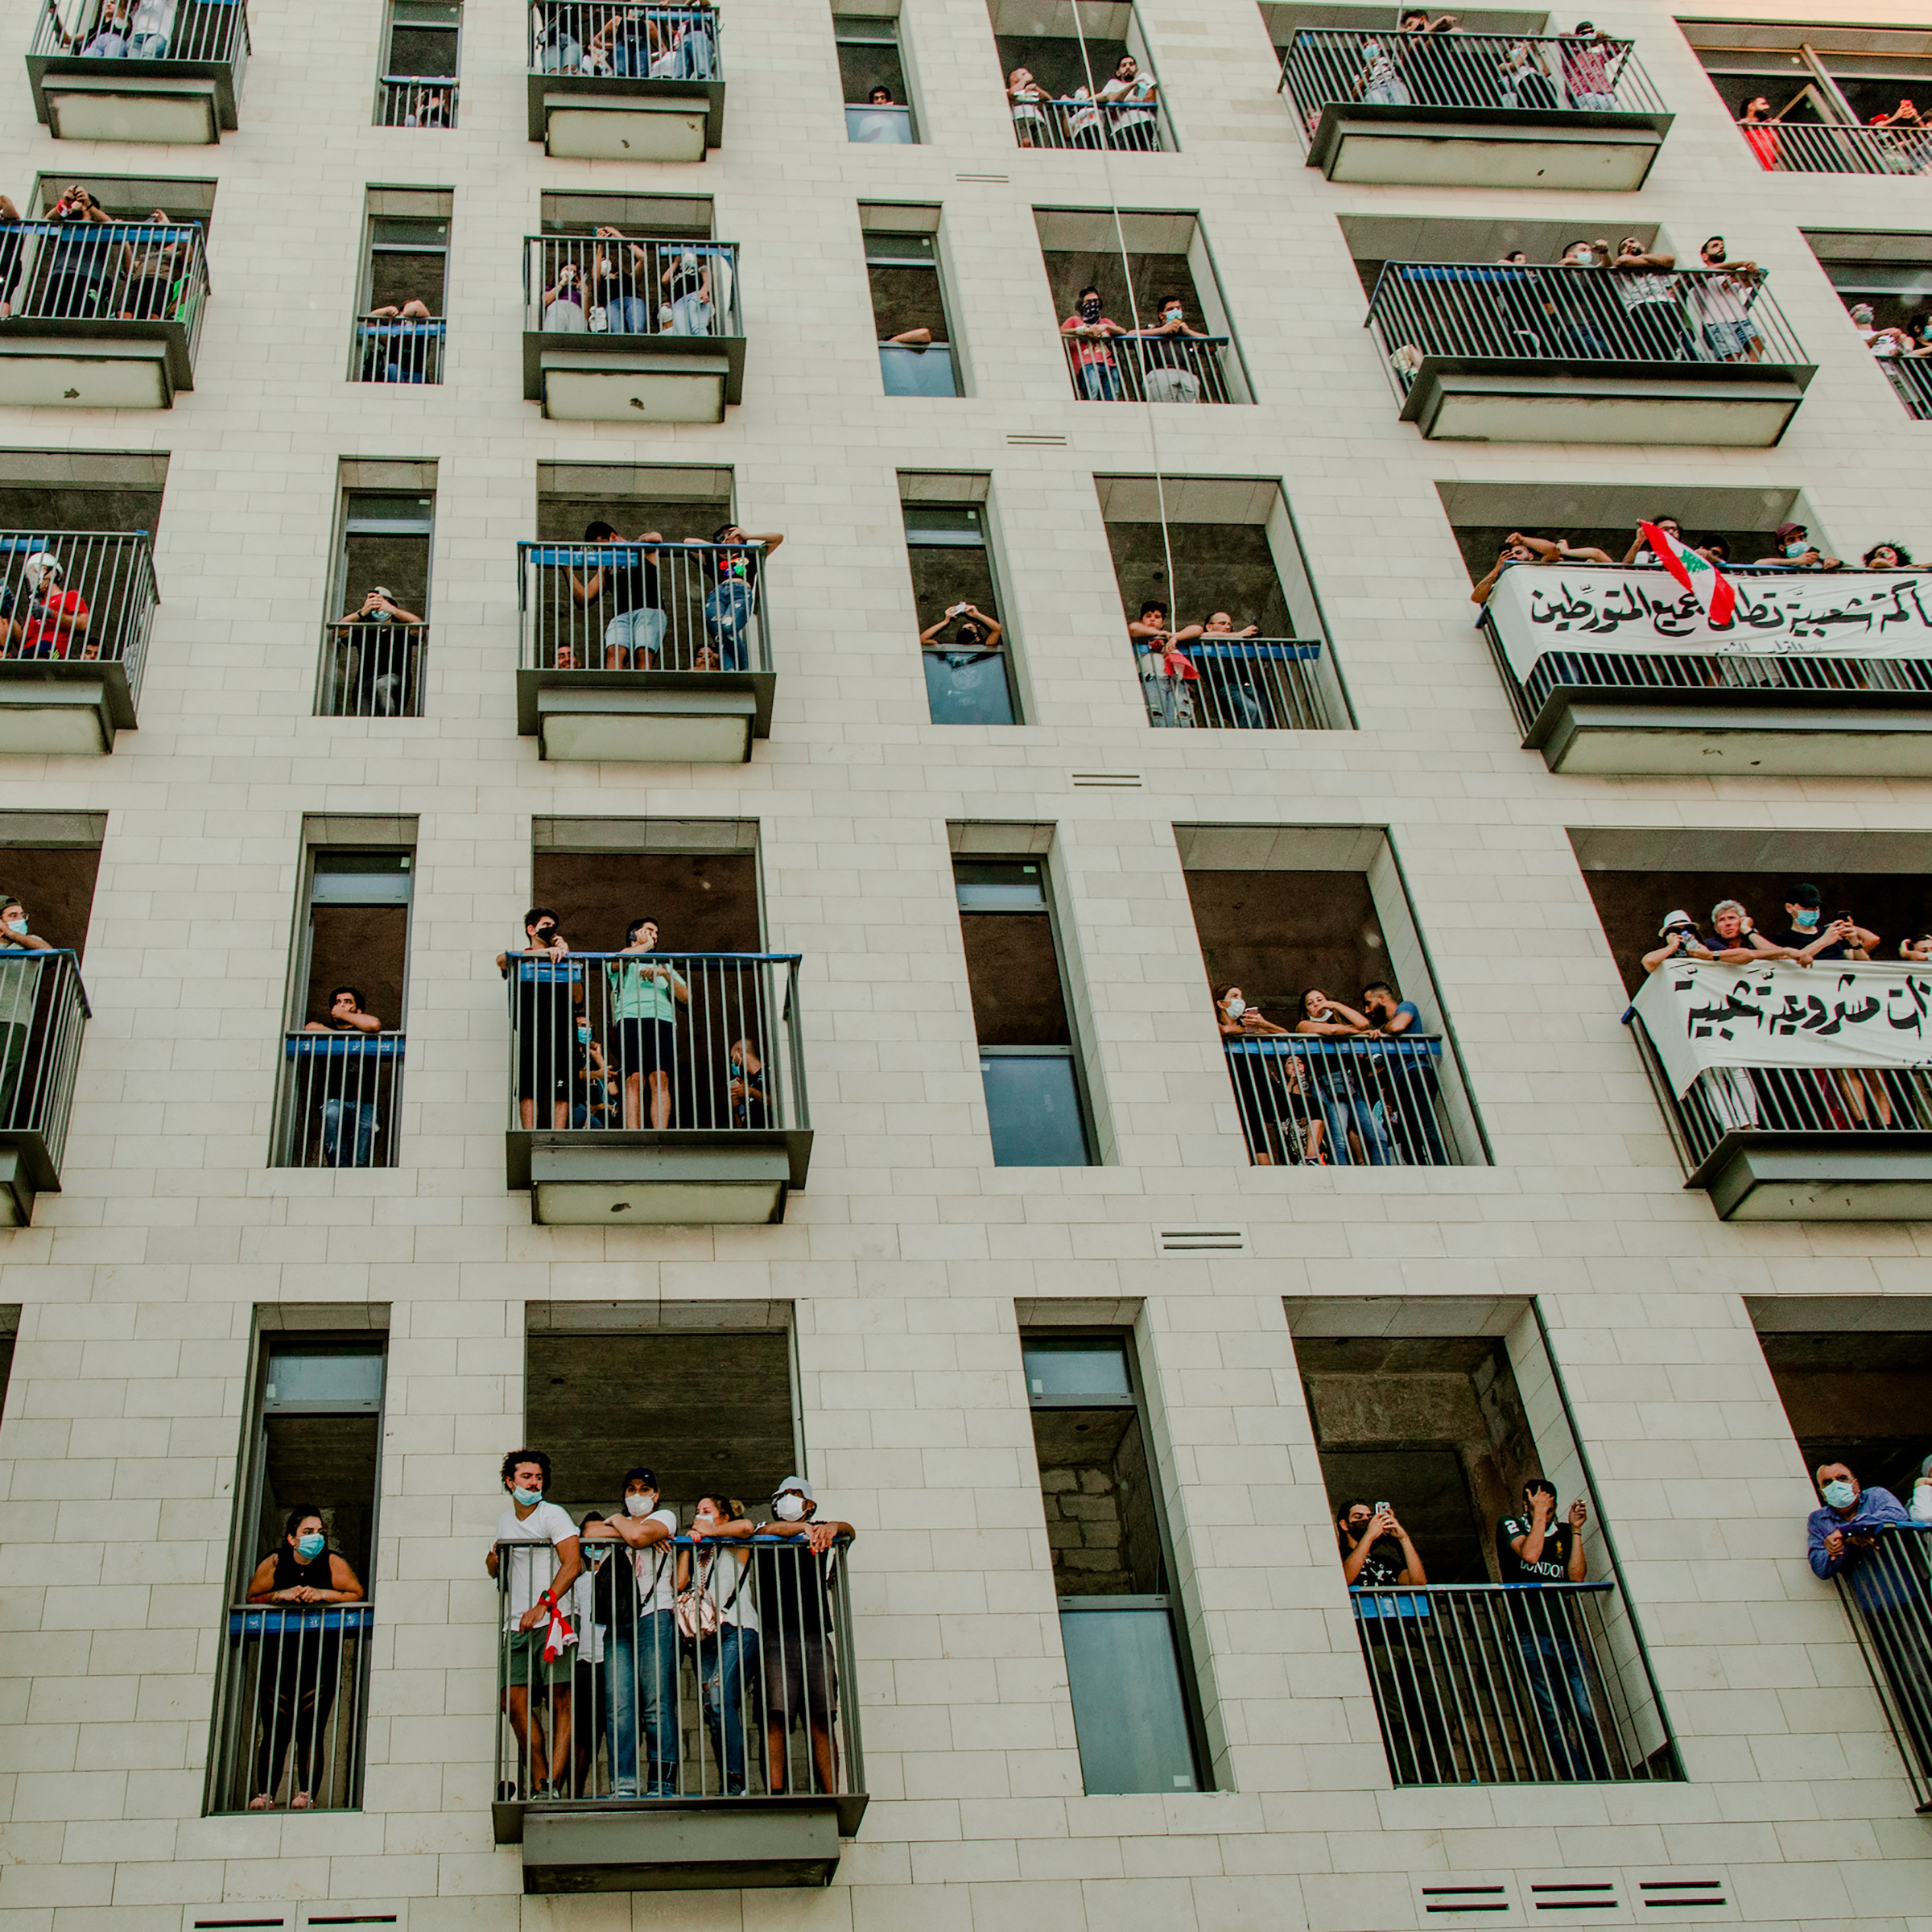 People gather on balconies during the Aug. 8 protest. Protesters say negligence and corruption across Lebanon's political system contributed to the port disaster.